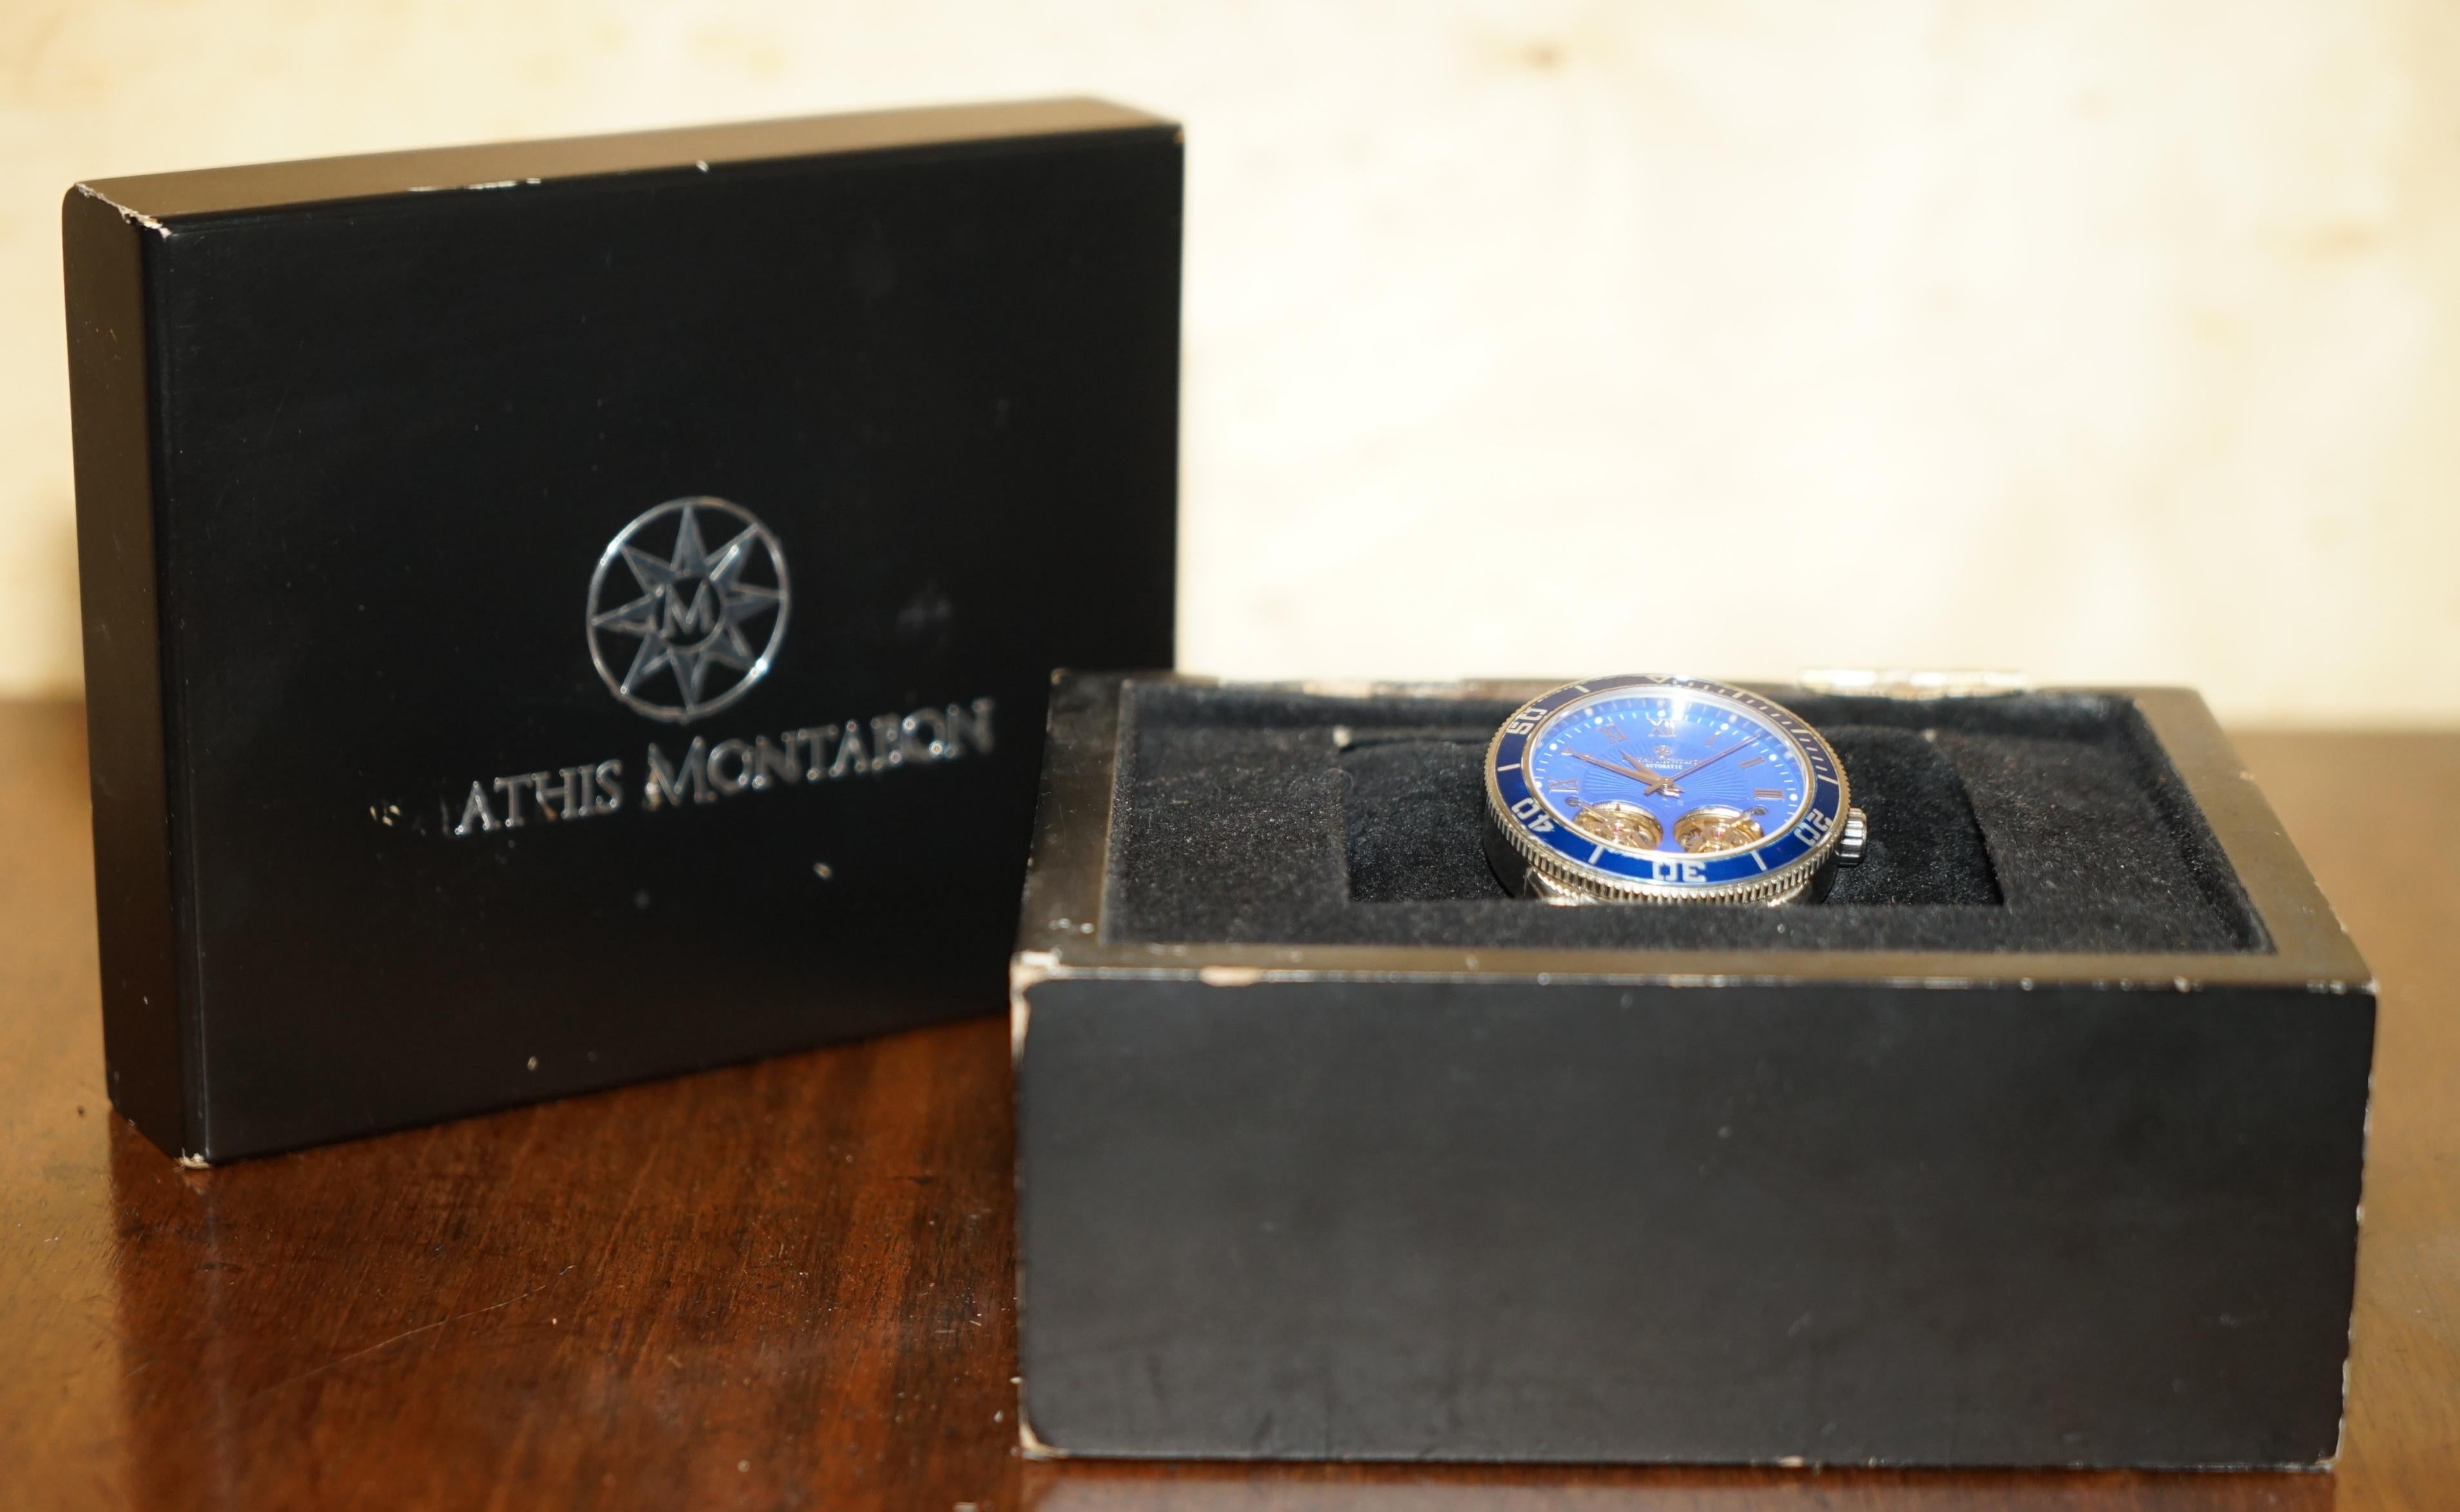 Royal House Antiques

Royal House Antiques is delighted to offer for sale this very nice designer Manthis Montabon Chronograph wristwatch 42mm RRP £1200

A good looking and decorative men’s watch with electric blue face and stainless steel